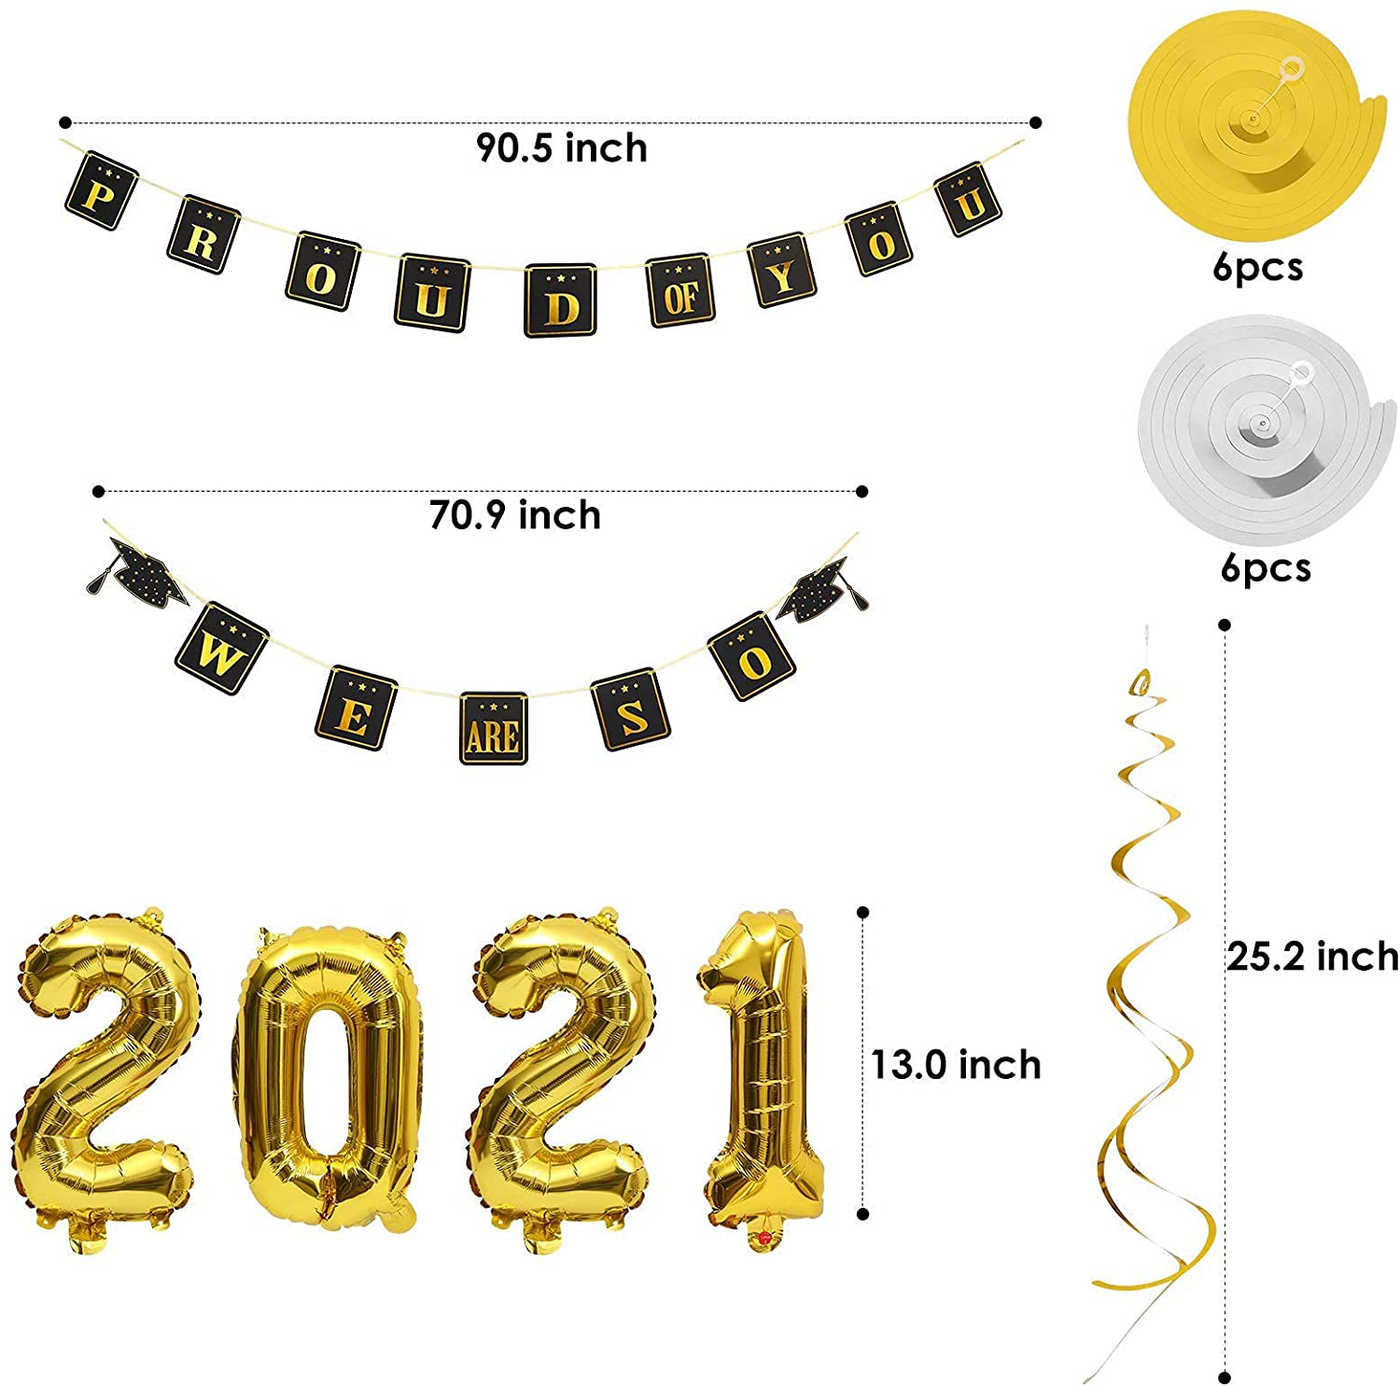 Graduation Decorations 2021, Graduation Party Supplies 17 pcs, We are So Proud of You' Banner with 12 pcs Hanging Swirls and Gold 2021 Graduation Balloons, Black and Gold Decorations